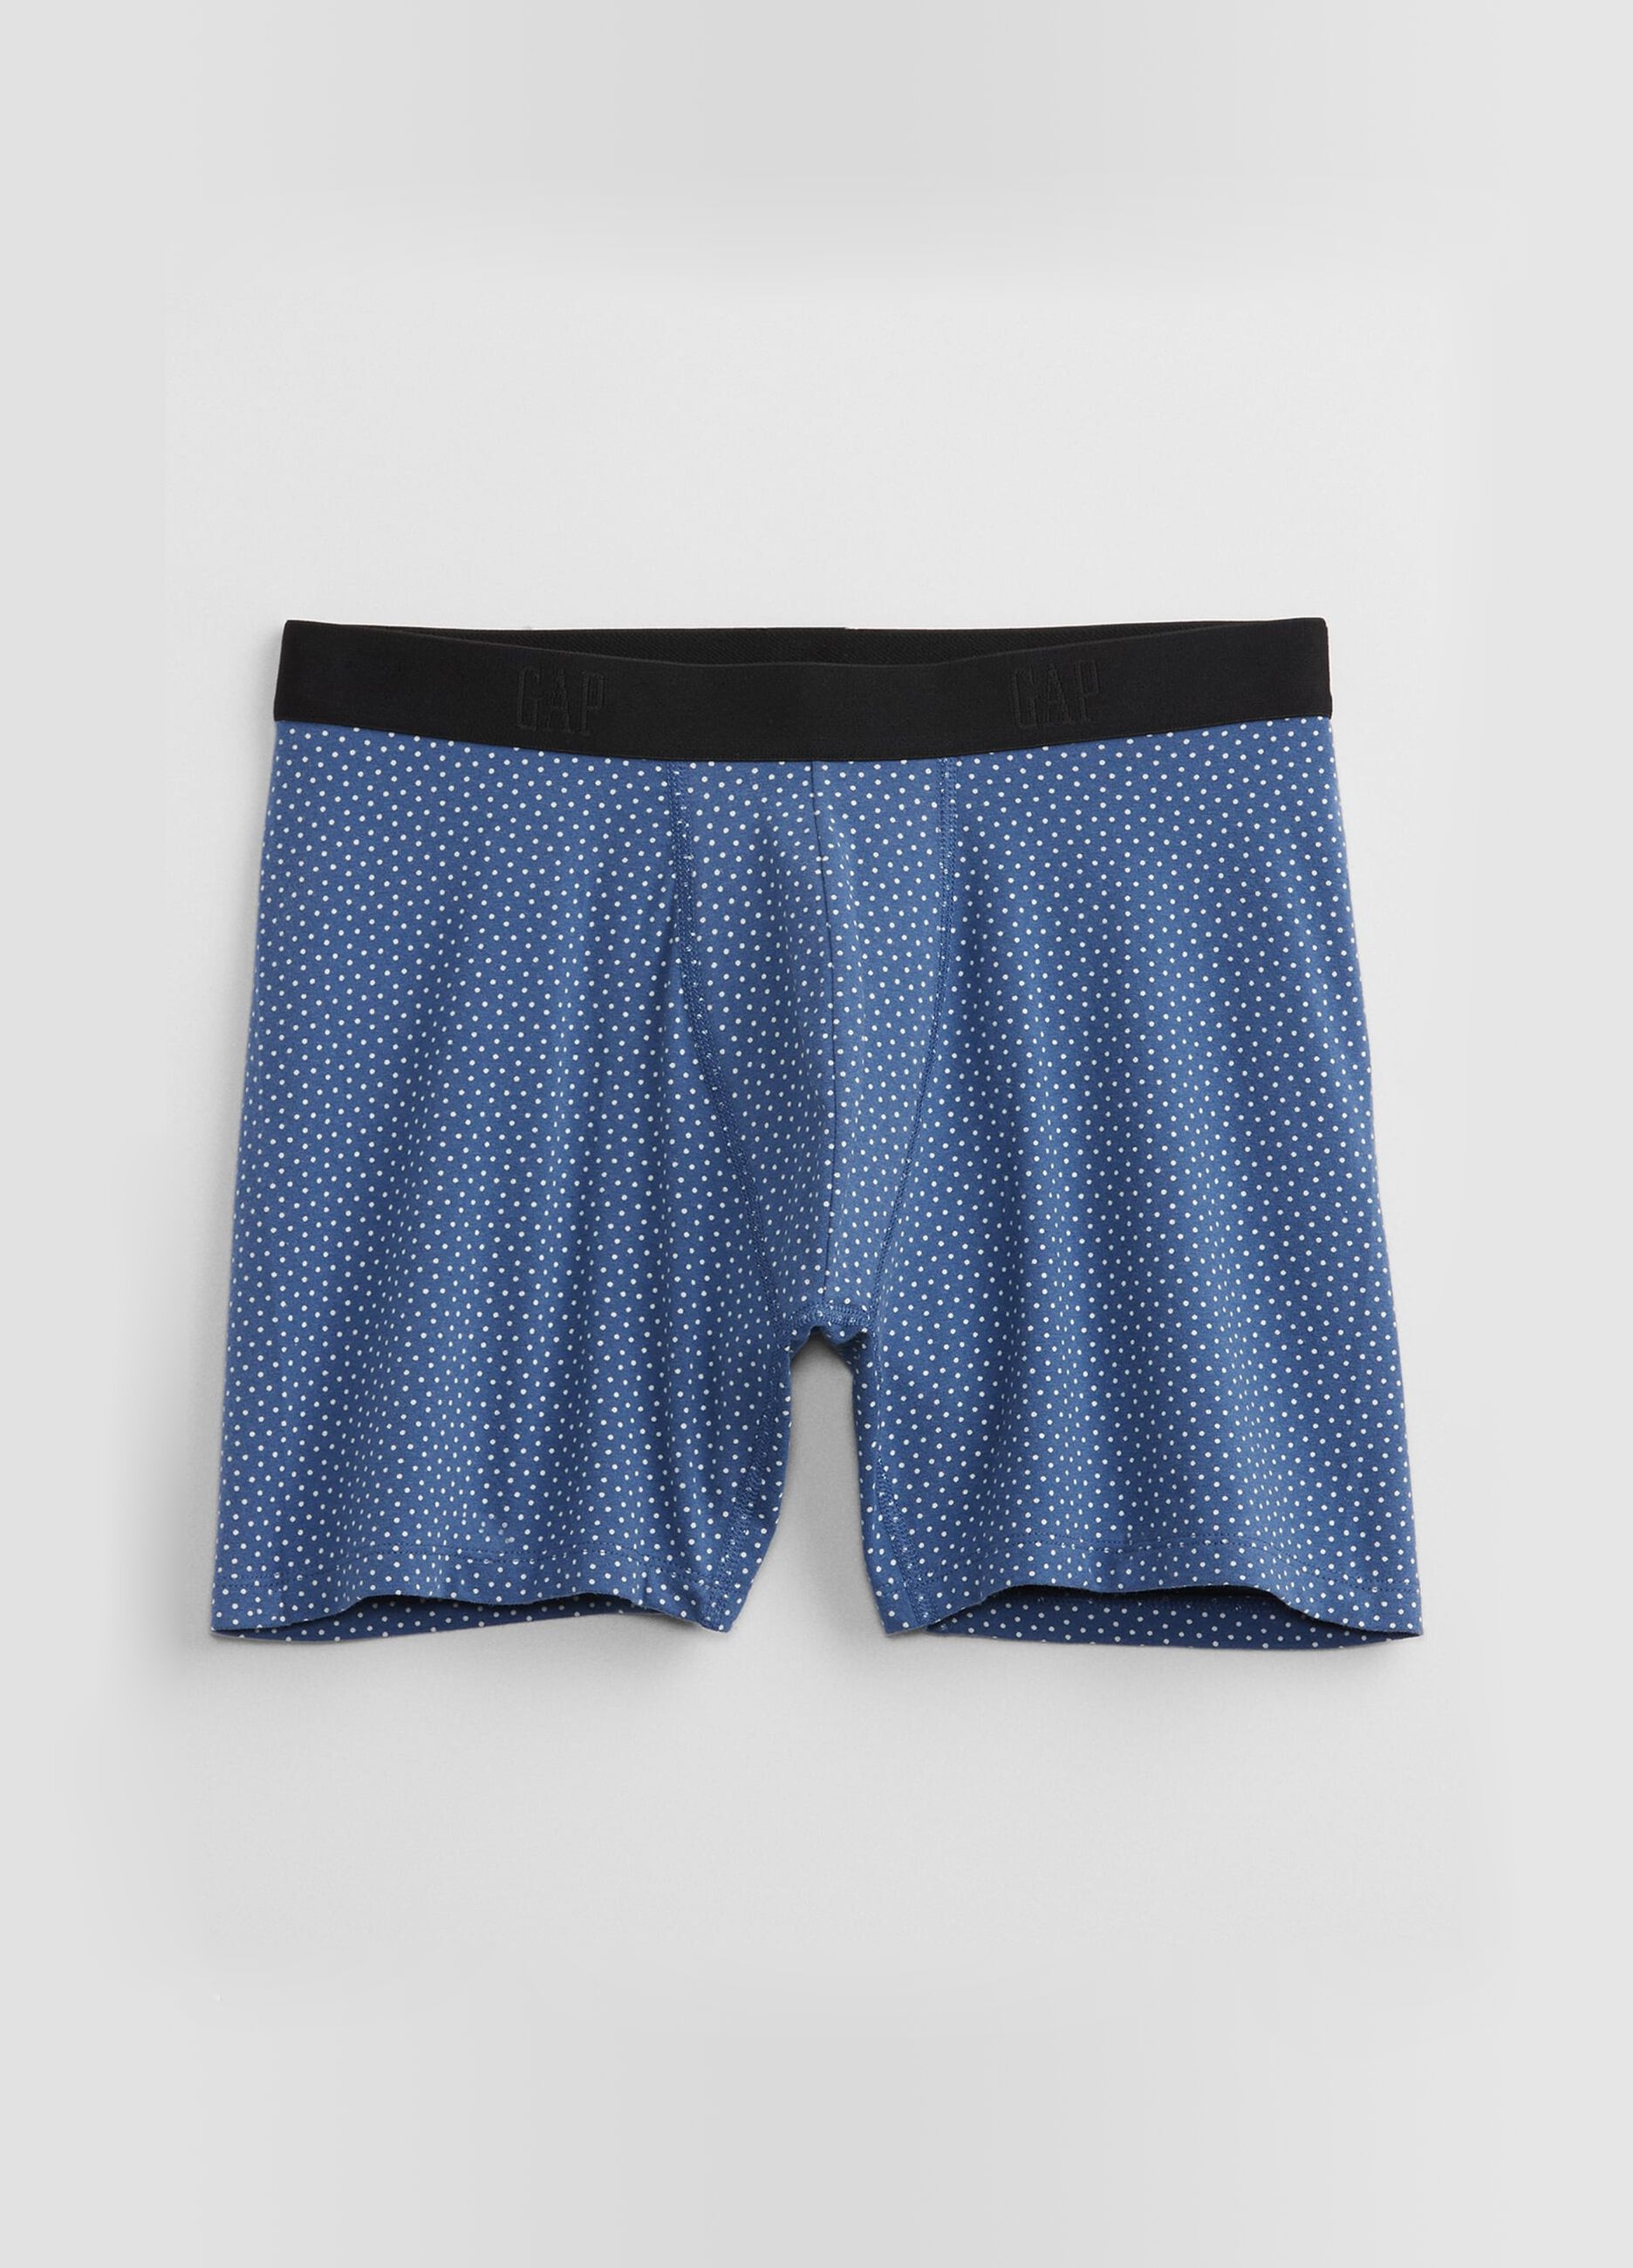 Boxer briefs with micro polka dot pattern.